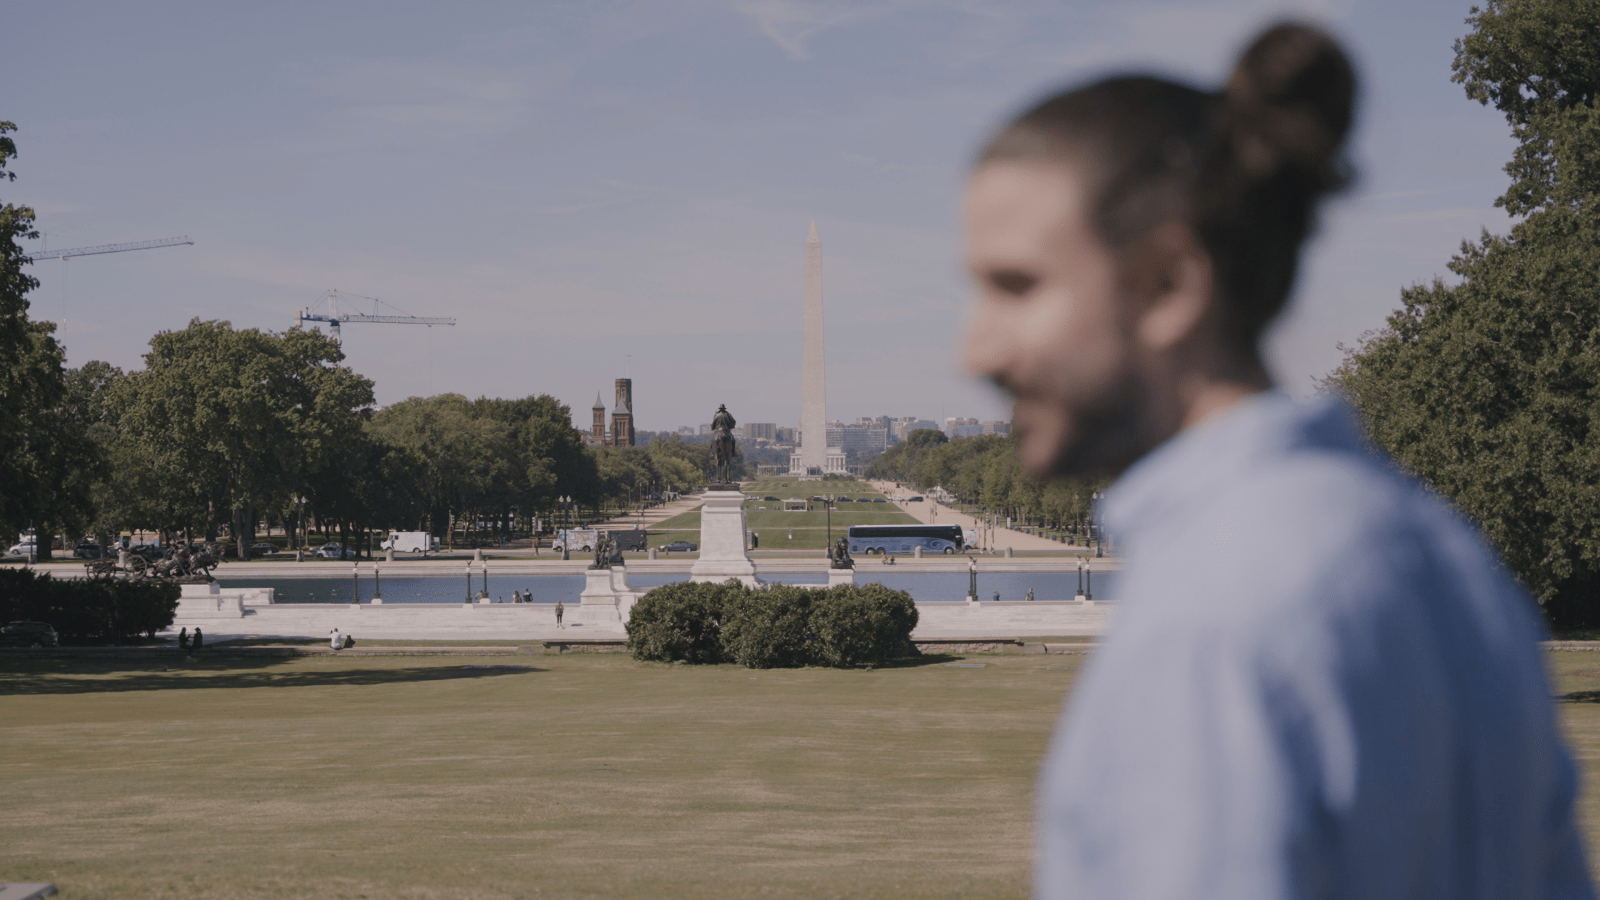 Adam Met, climate activist and musician in the band AJR, visits Washington, D.C., to negotiate bipartisan climate policies.